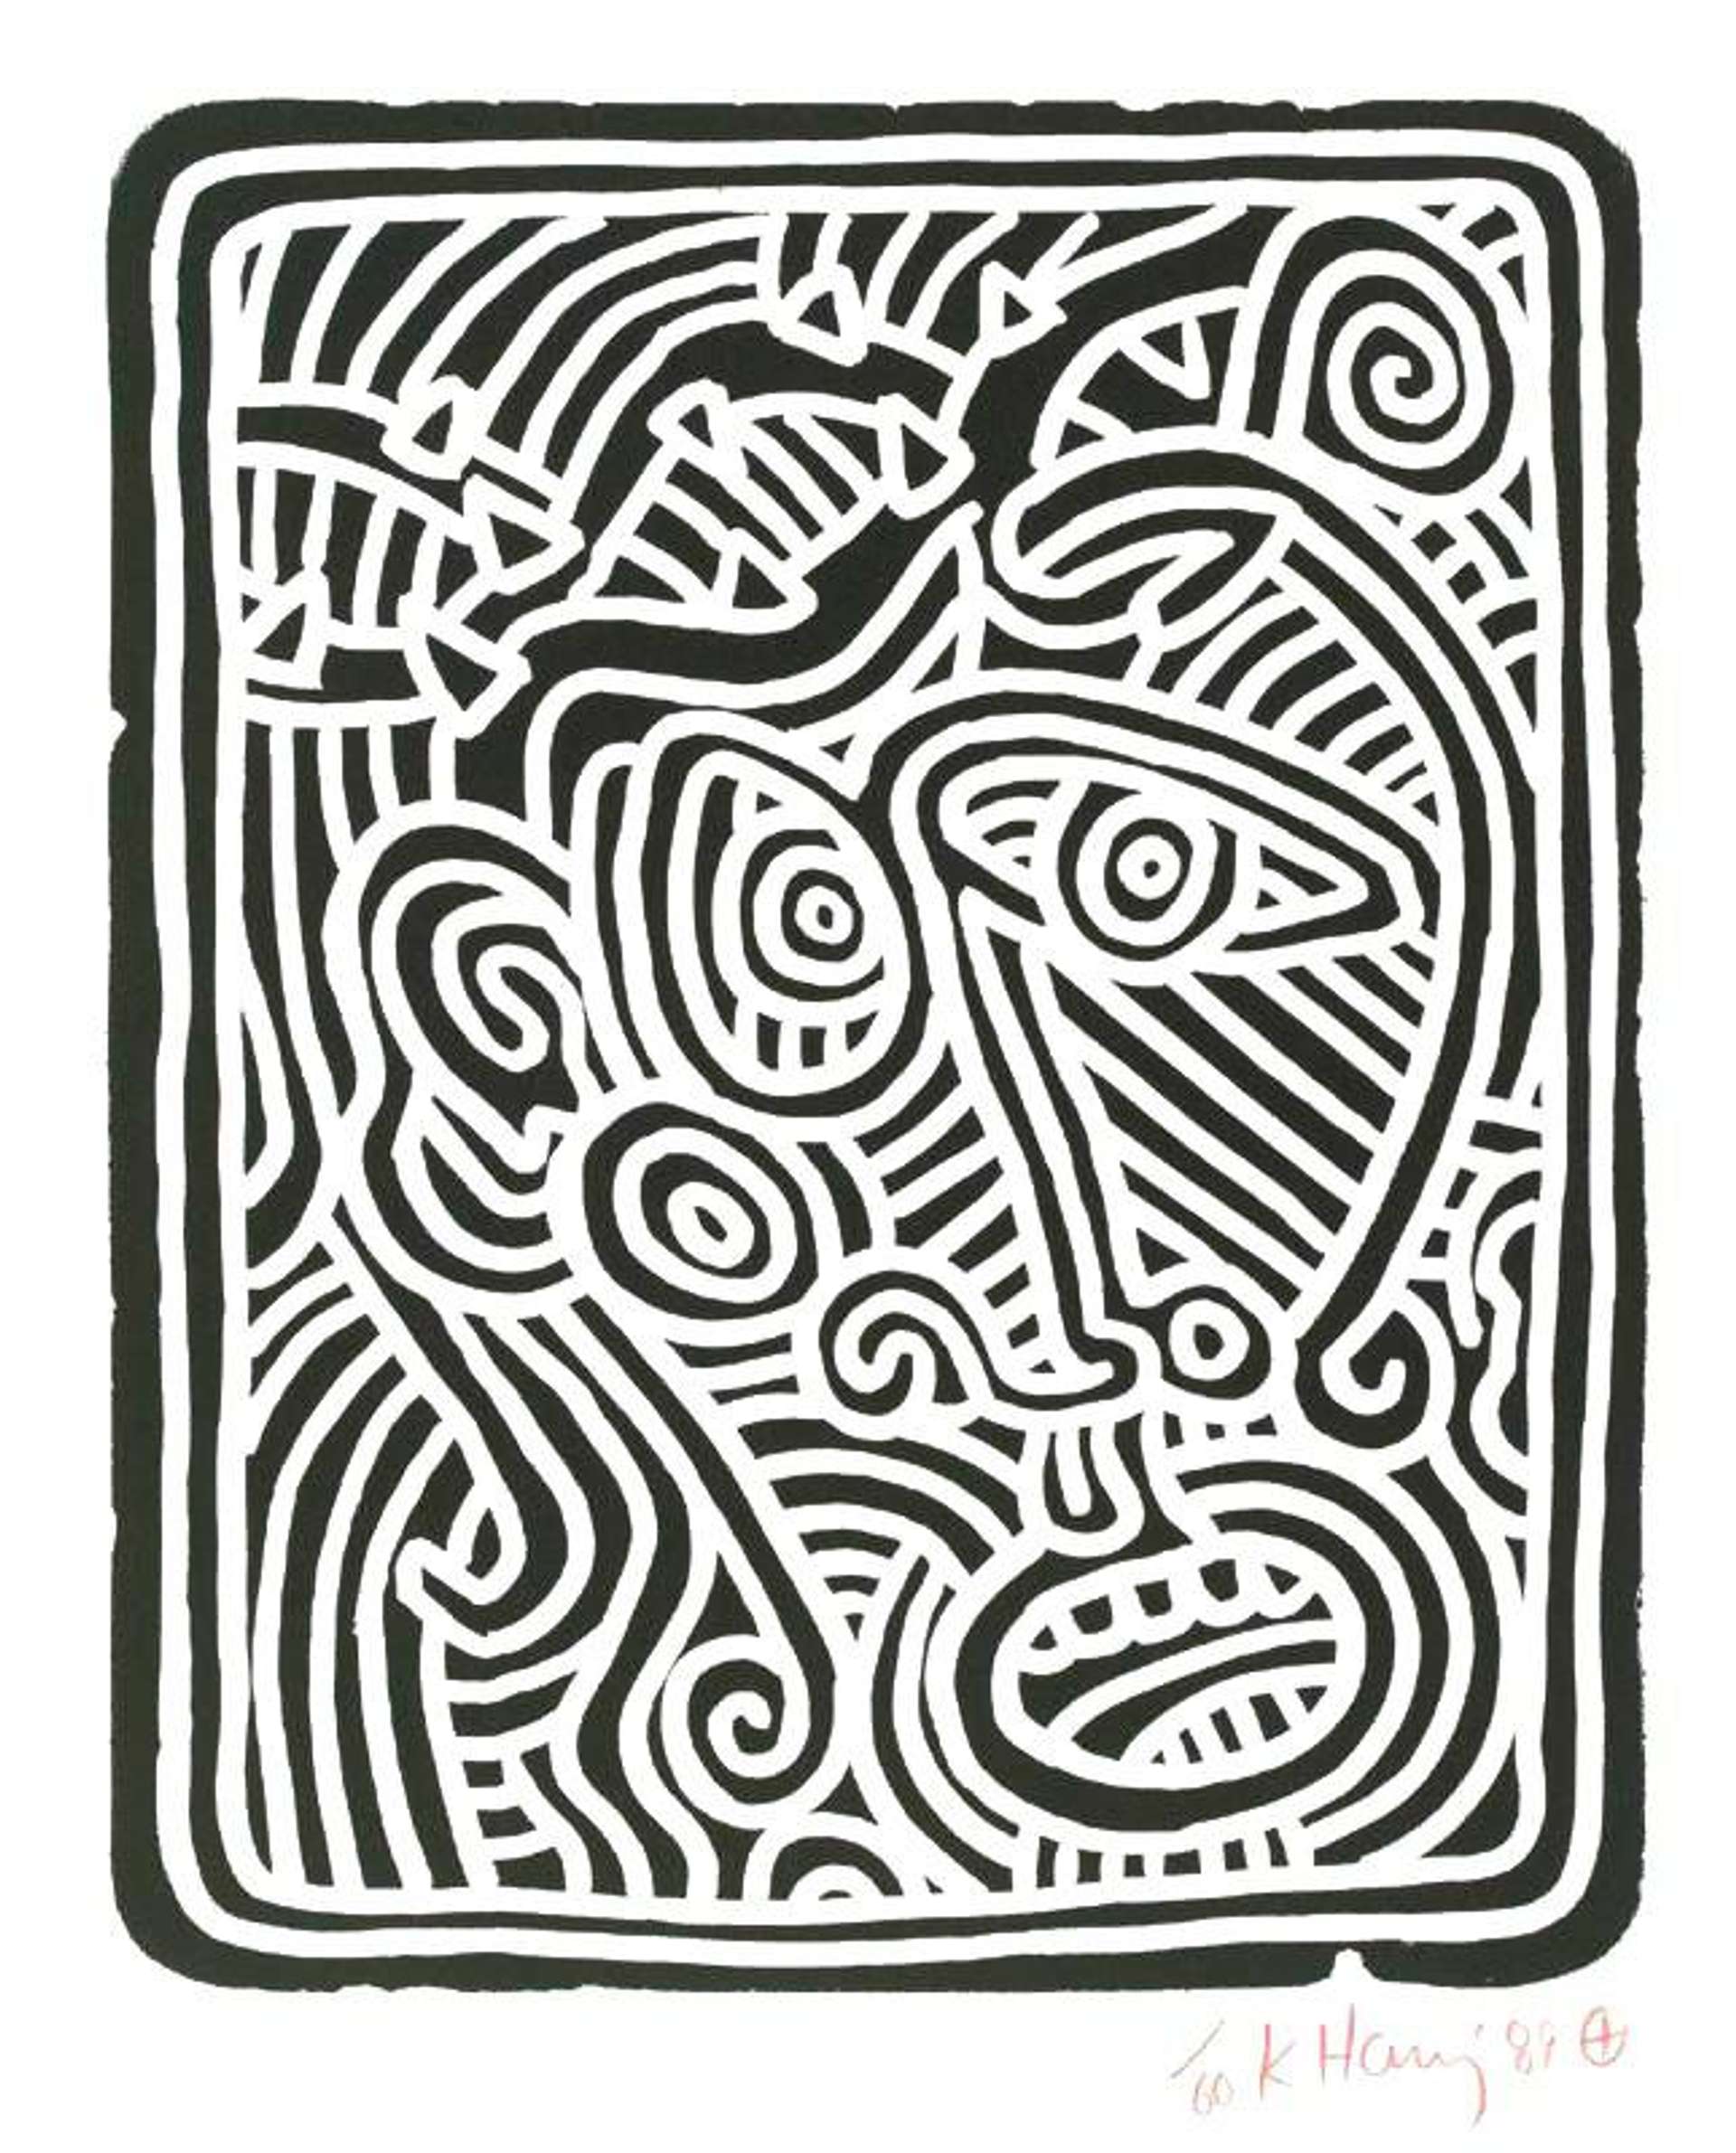 Keith Haring Stones 1 (Signed Print) 1989